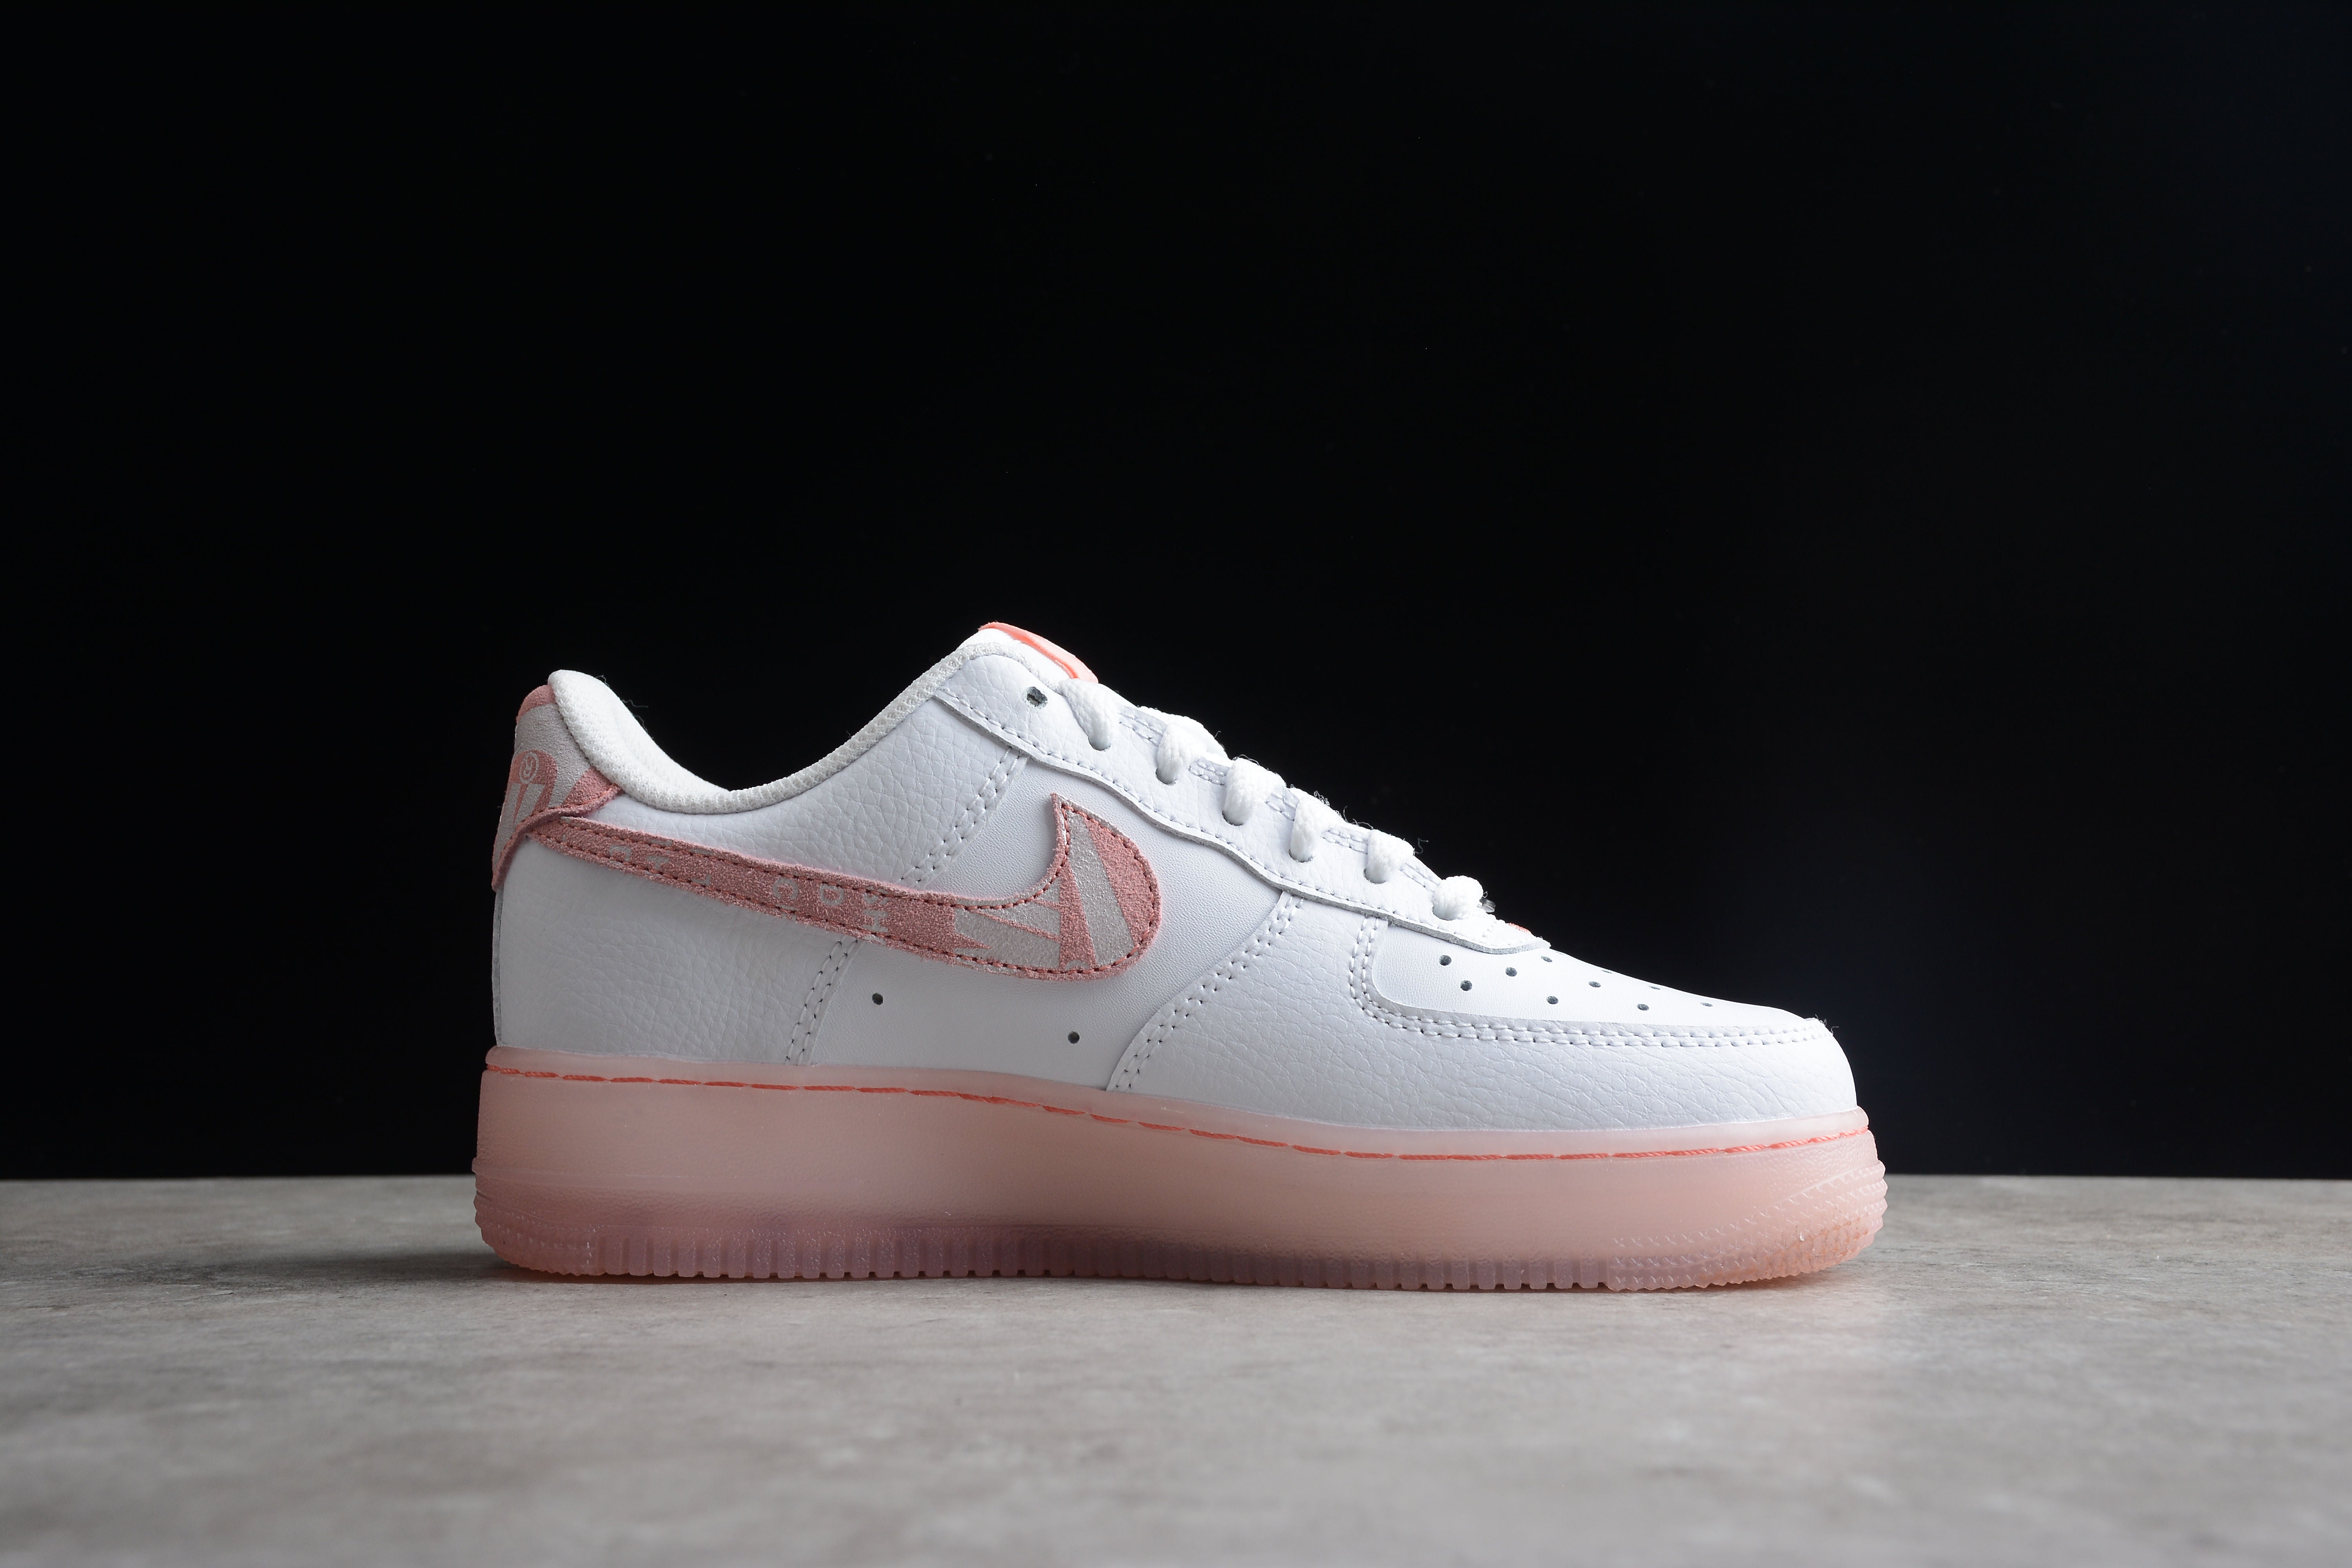 Nike airforce A1 pinkish shoes